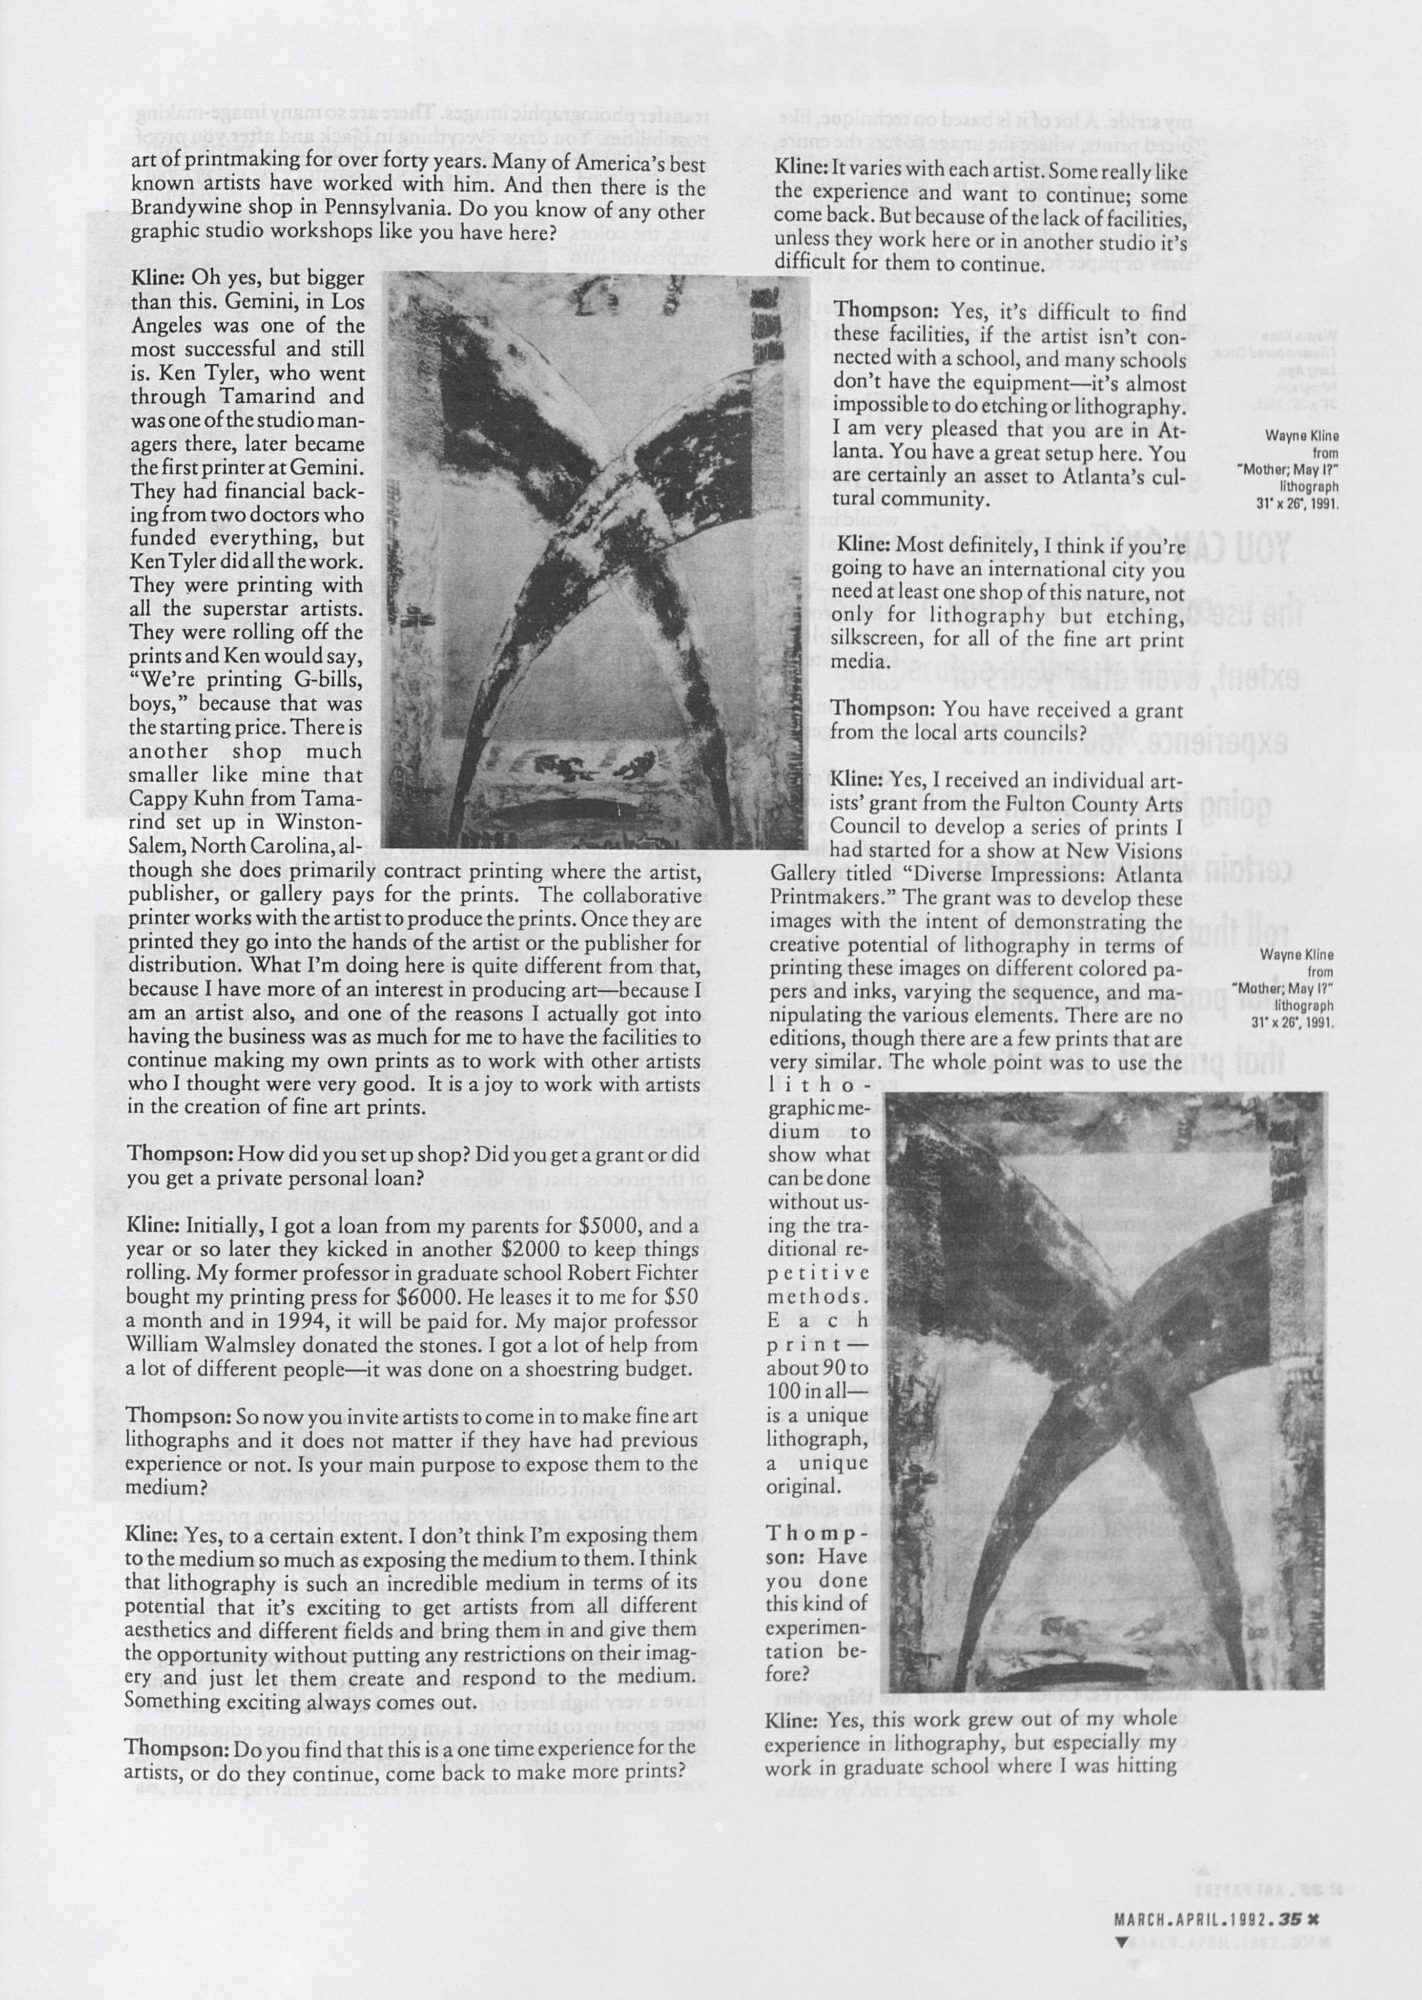 Scan of an interview between Mildred Thompson and Wayne Kline.